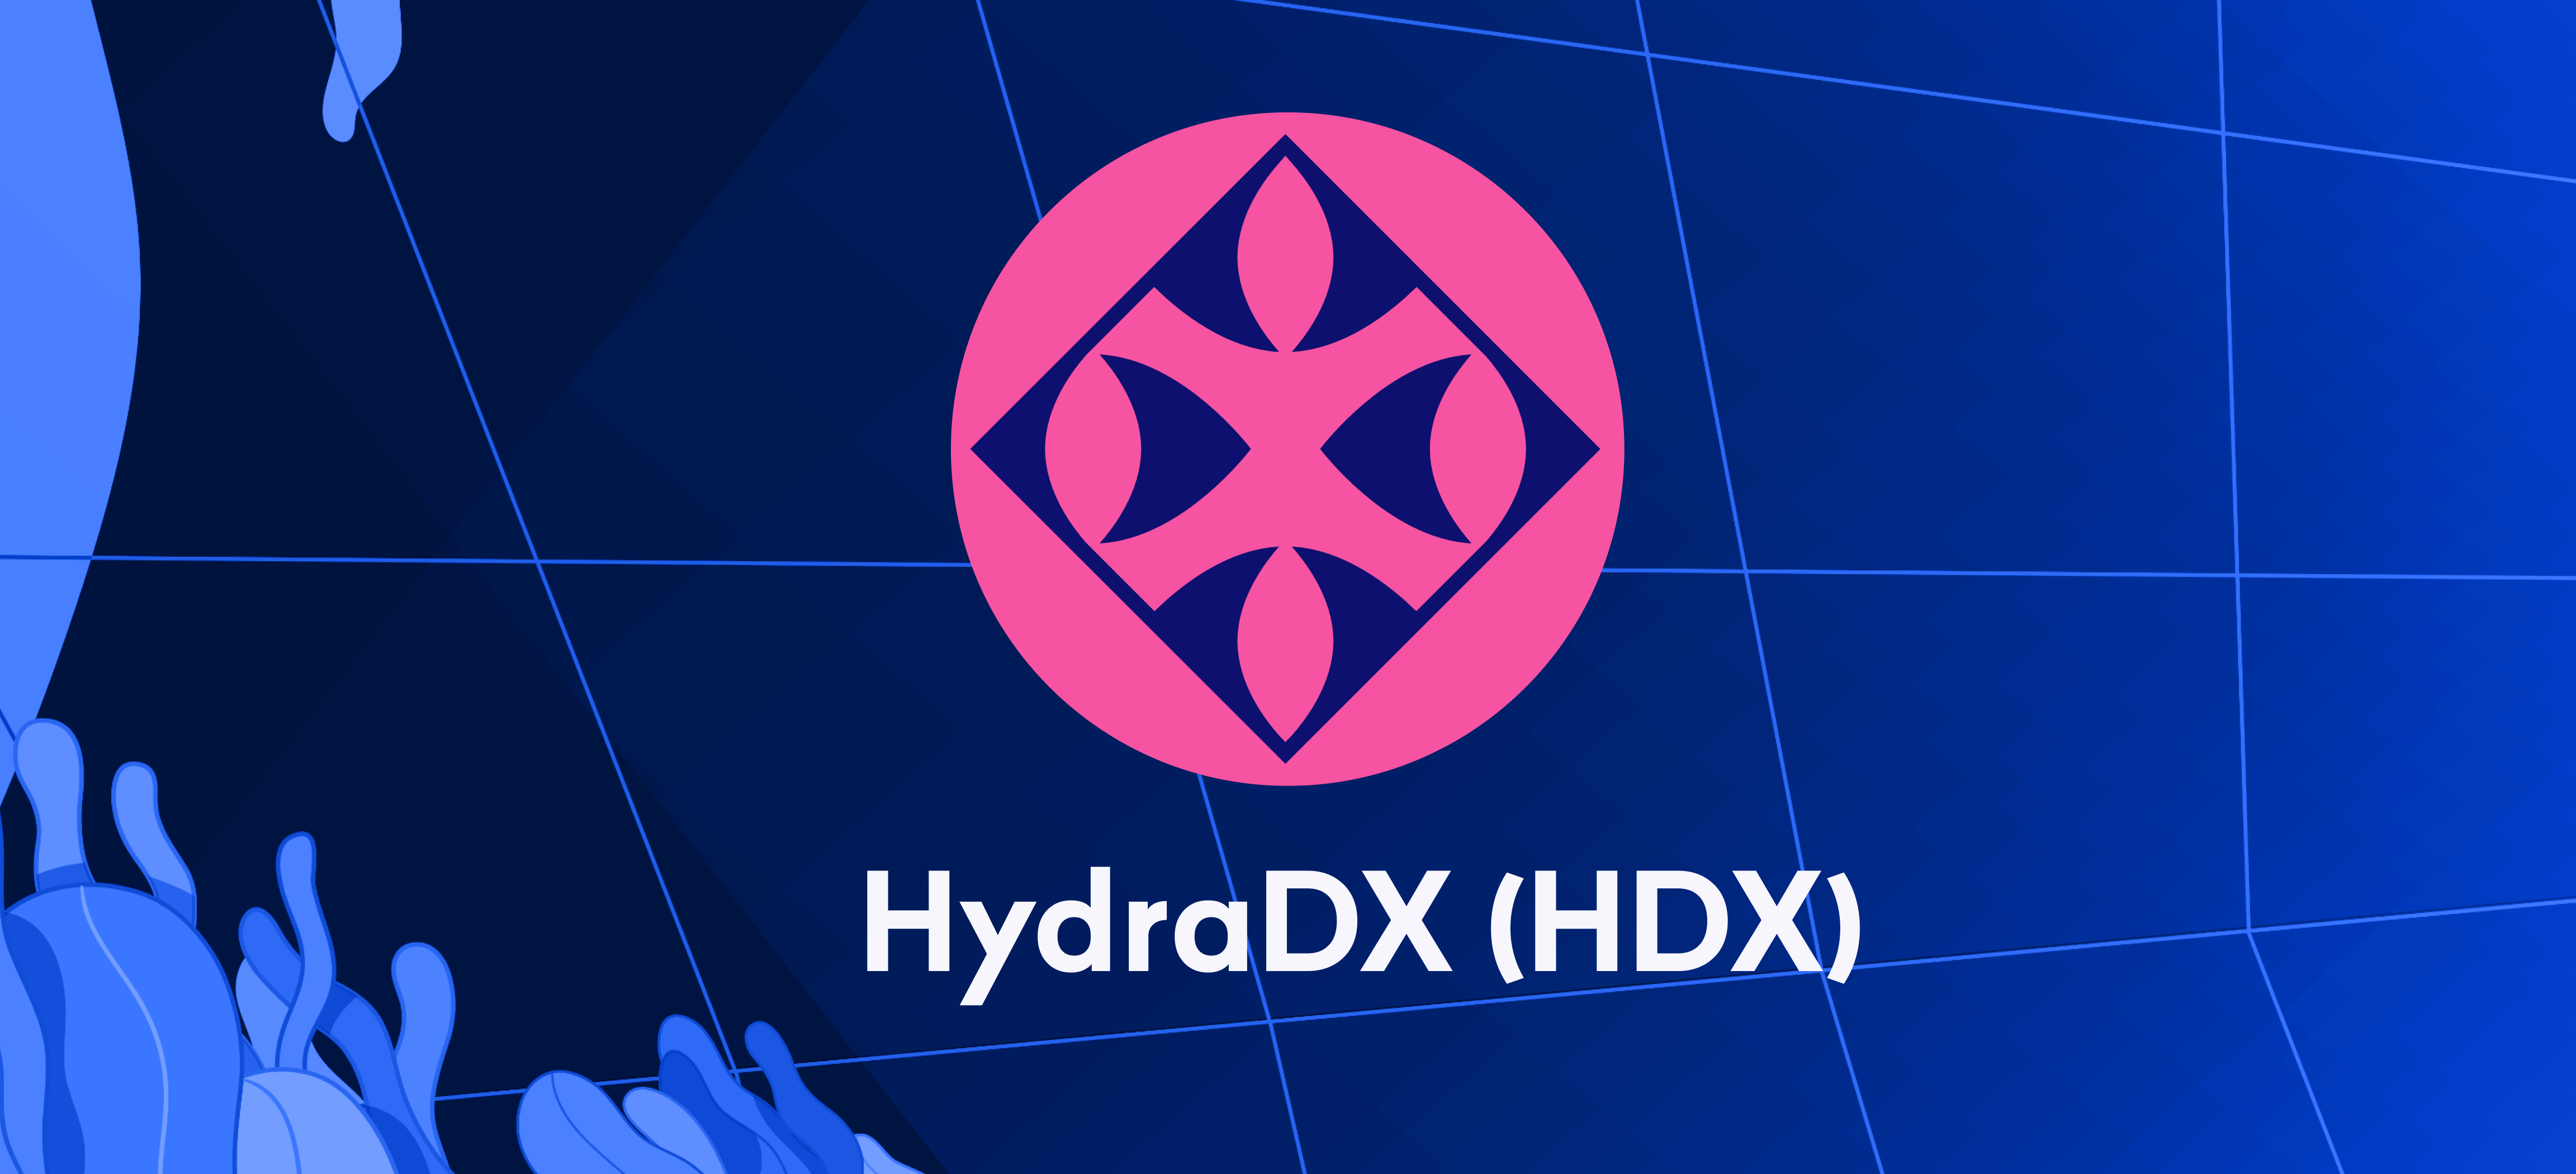 CRYPTOCURRENCY: Trading for HydraDX (HDX) starts January 24 – deposit now!